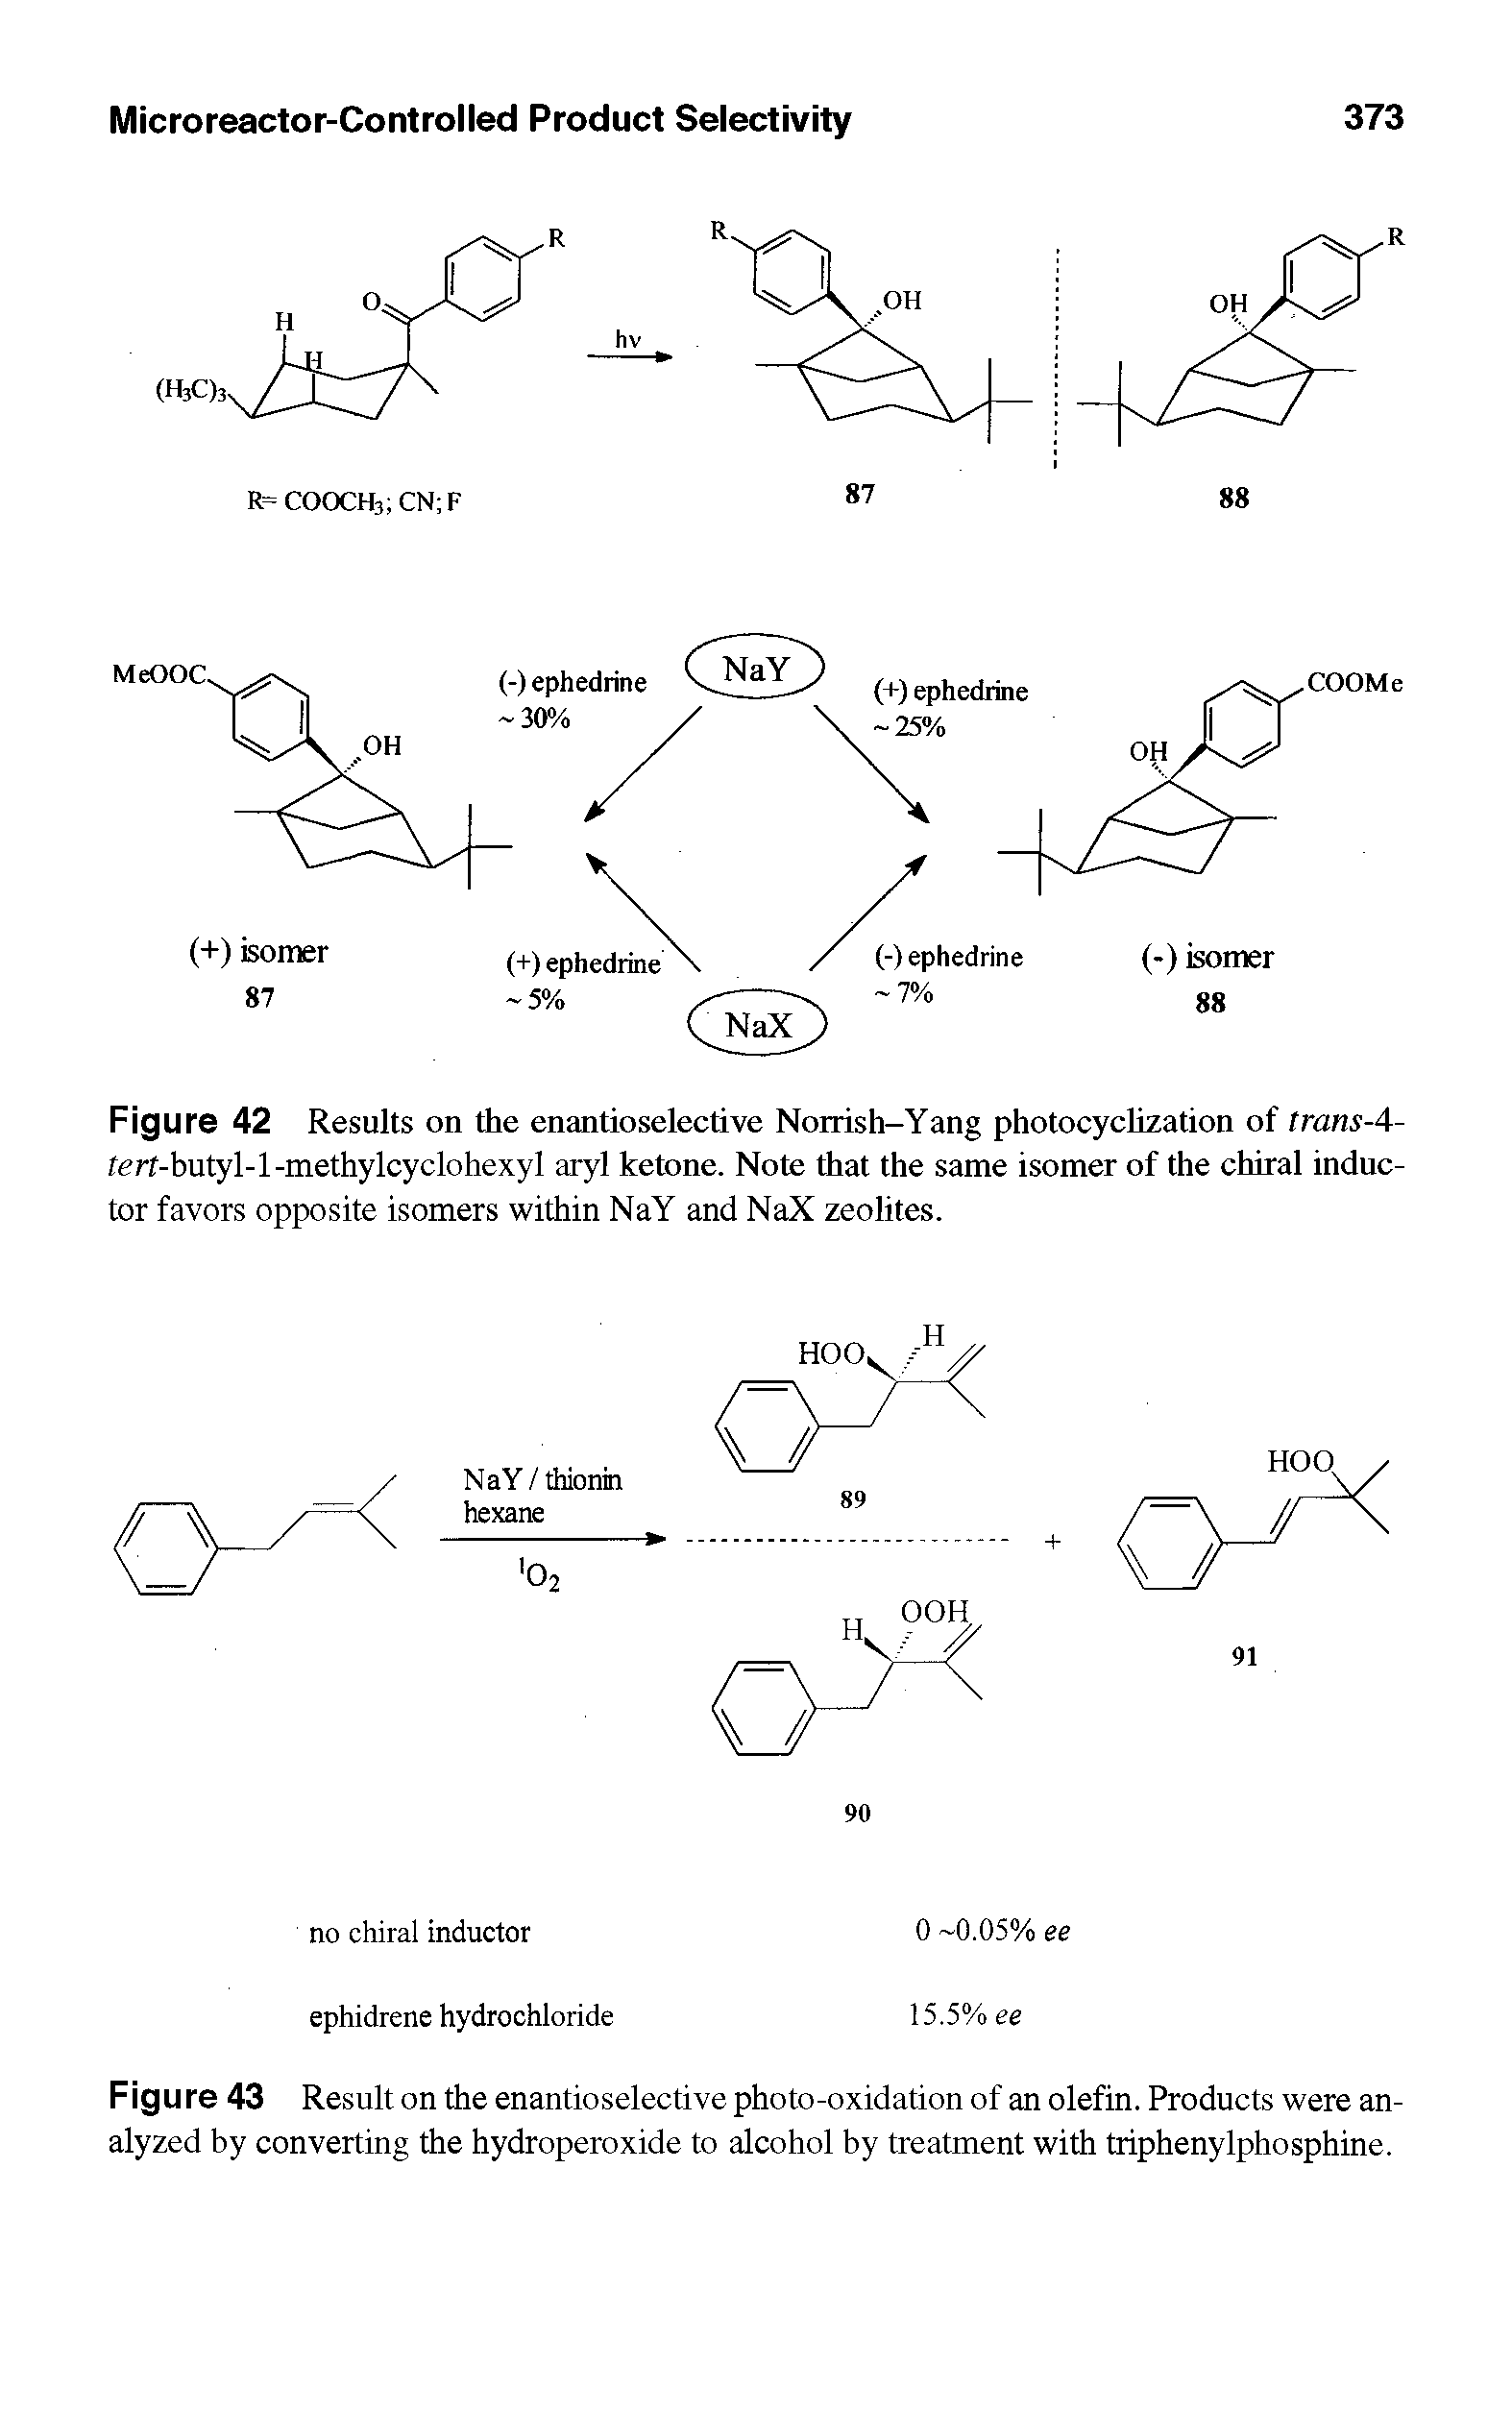 Figure 42 Results on the enantioselective Norrish-Yang photocyclization of trans-A-terf-butyl-1-methy Icy clo hexyl aryl ketone. Note that the same isomer of the chiral inductor favors opposite isomers within NaY and NaX zeolites.